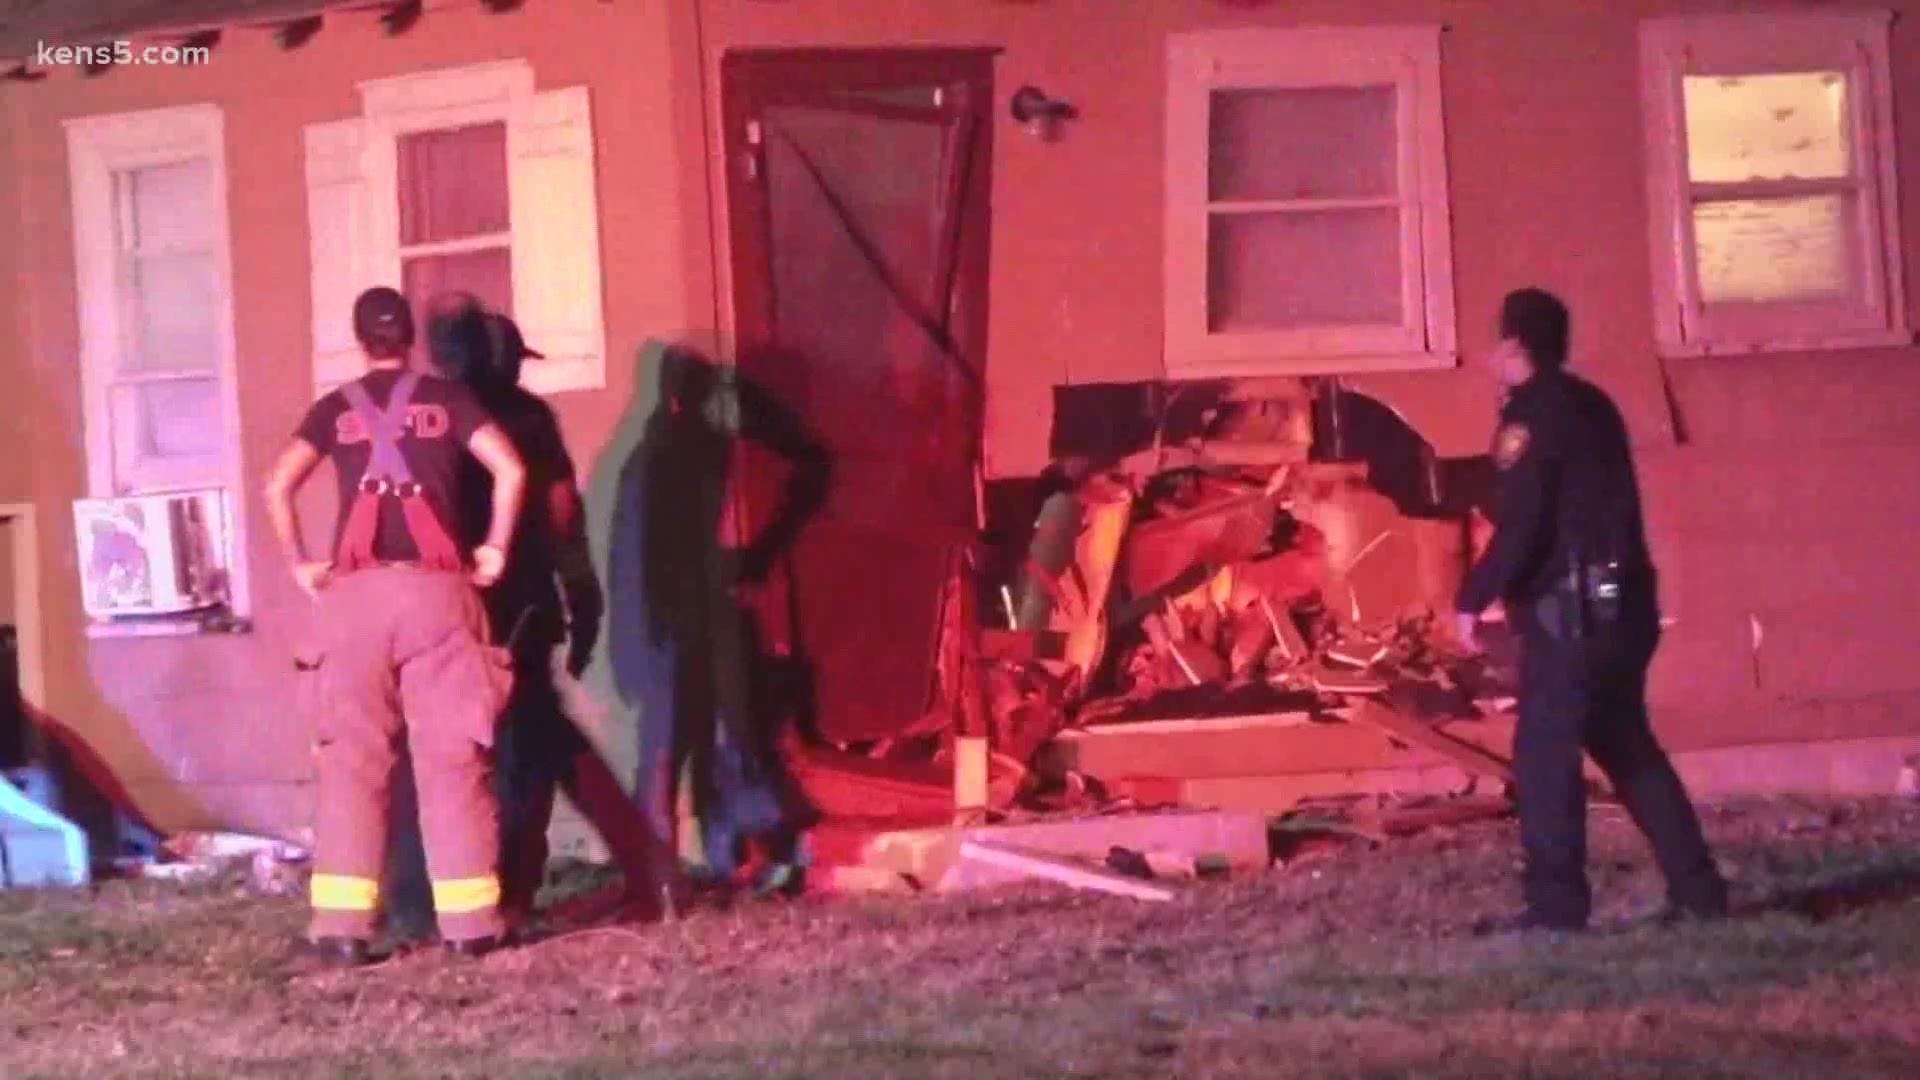 A car crashed into the side of a home, but the driver took off on foot and has not been found, the San Antonio Police Department said.